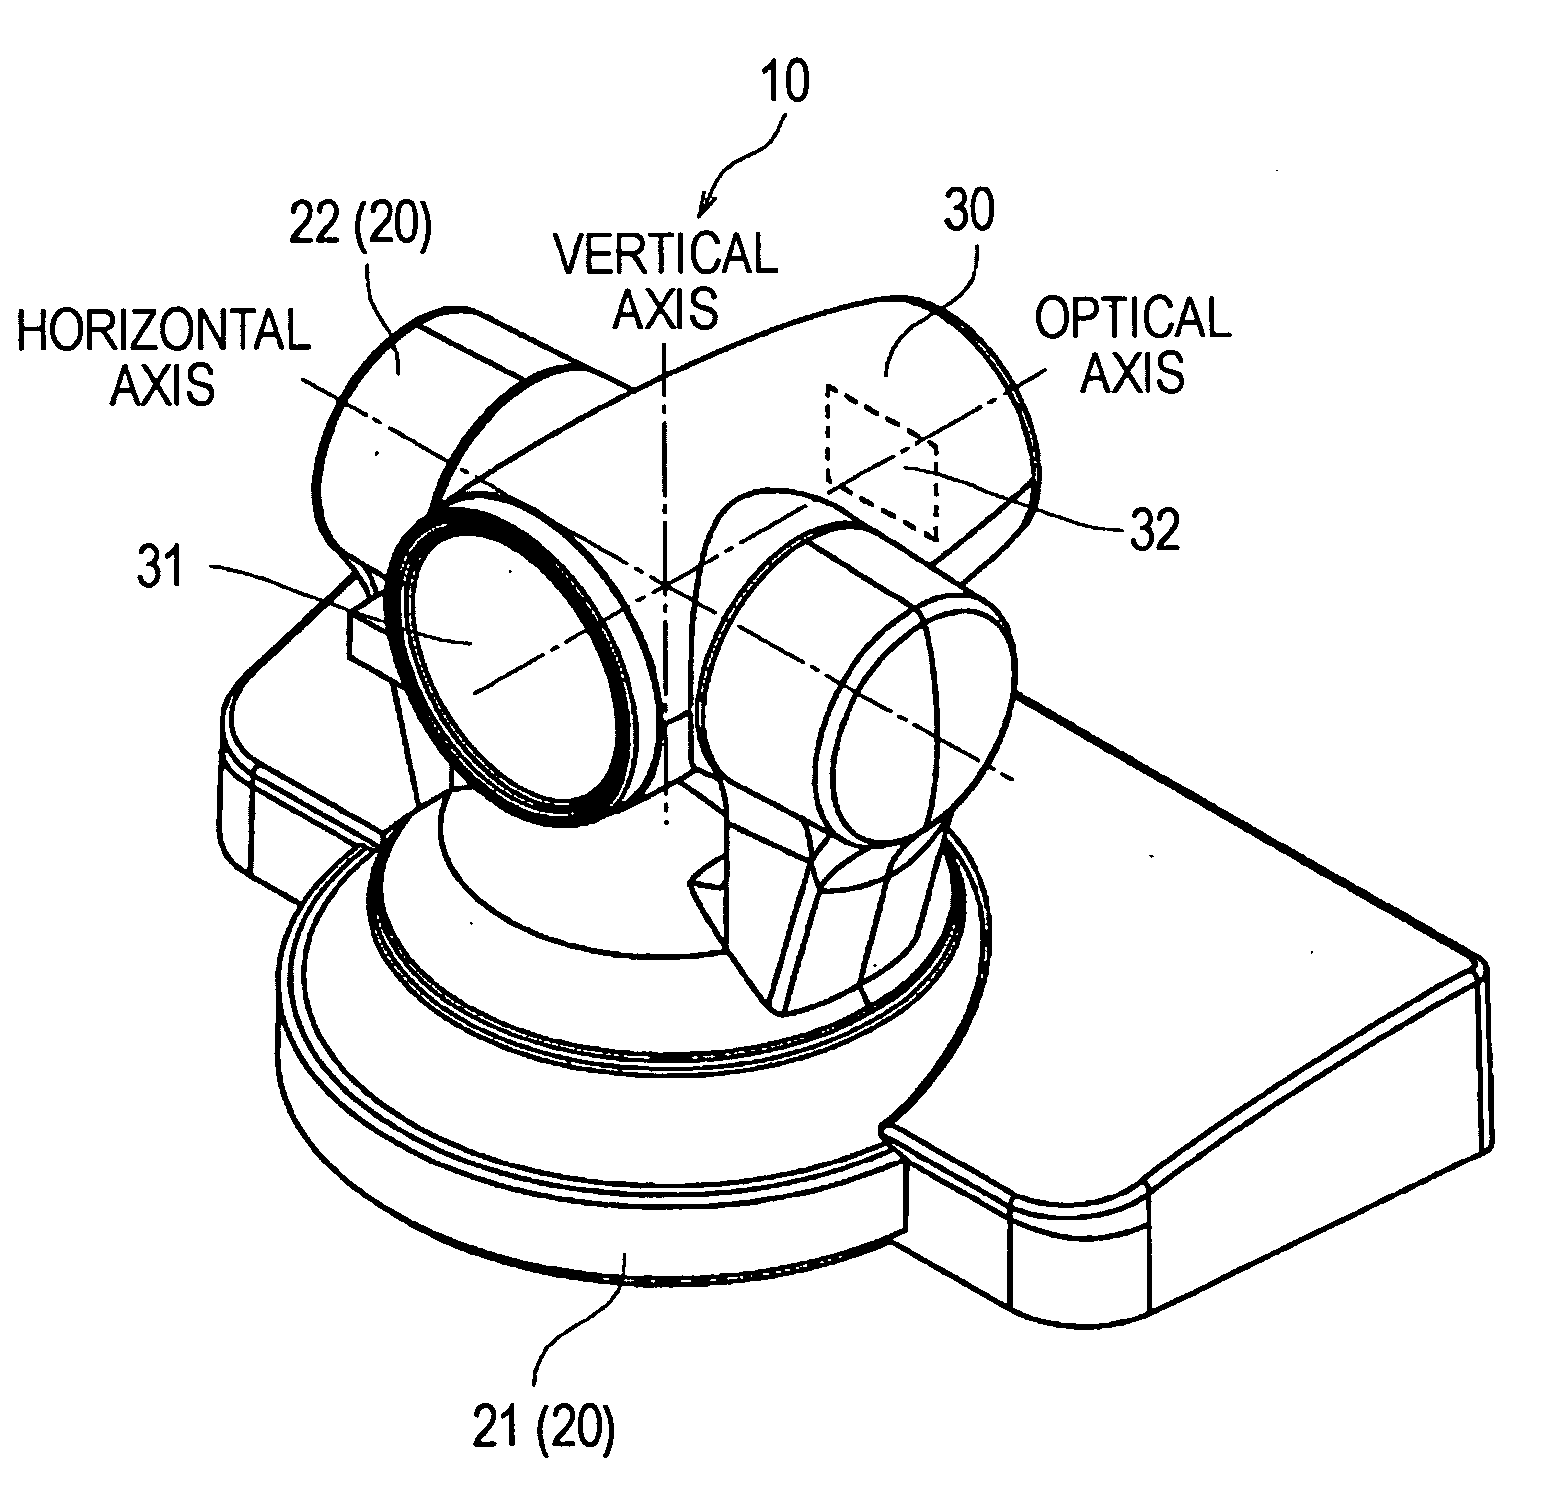 Image pickup apparatus with rotary lens barrel